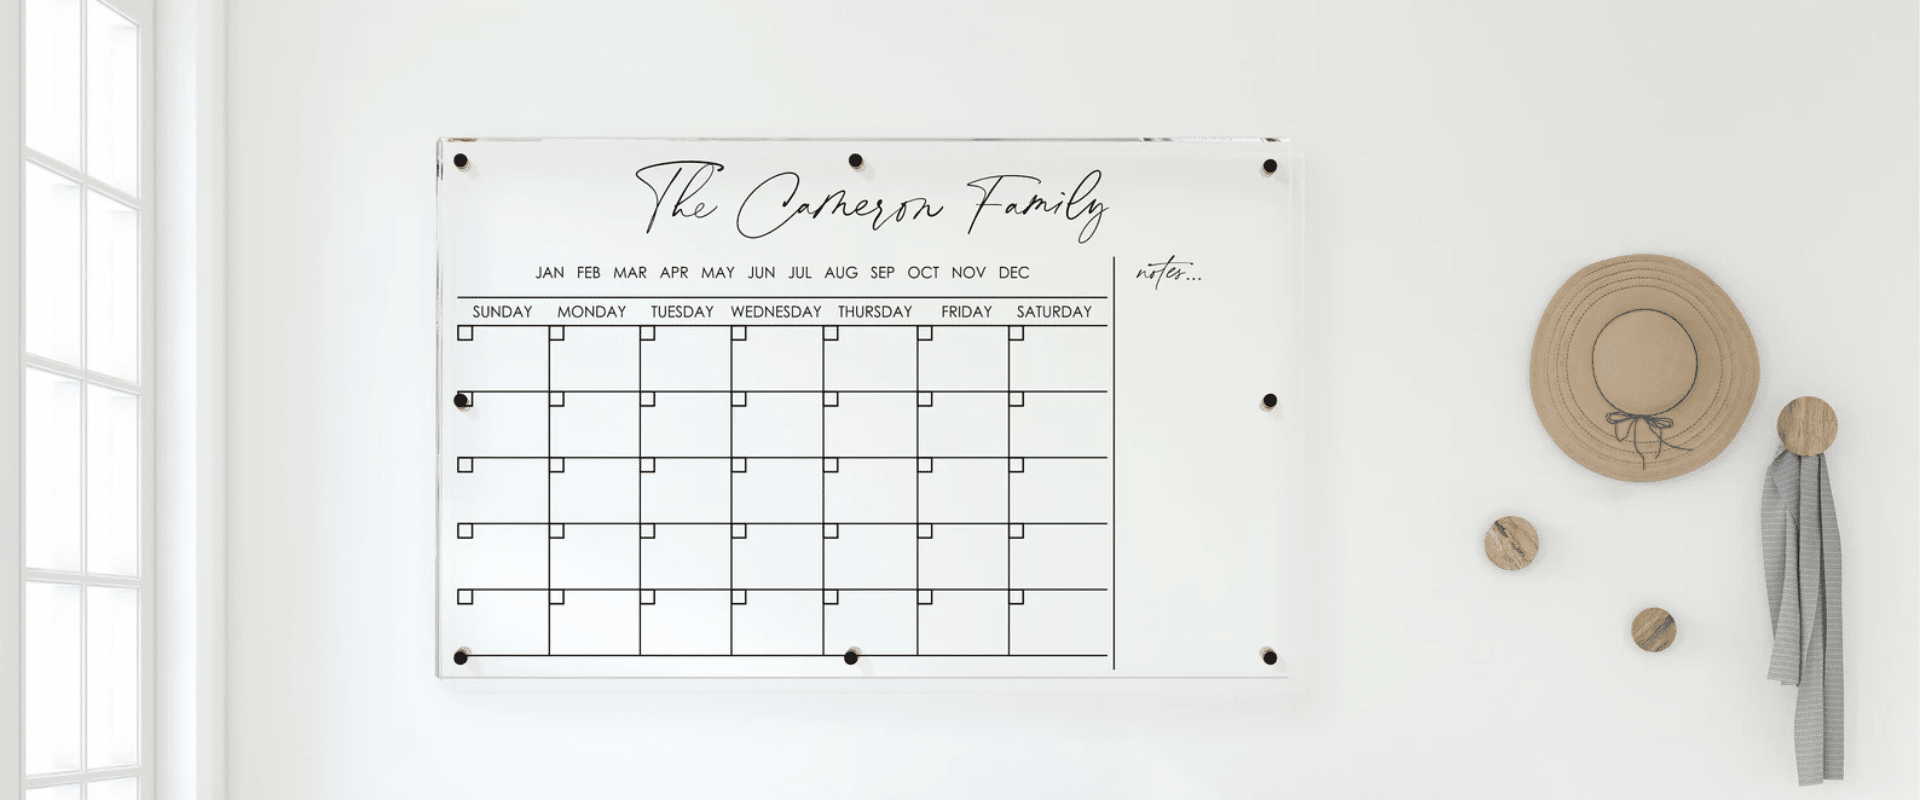 A personalized acrylic calendar for wall adorned with a hat.